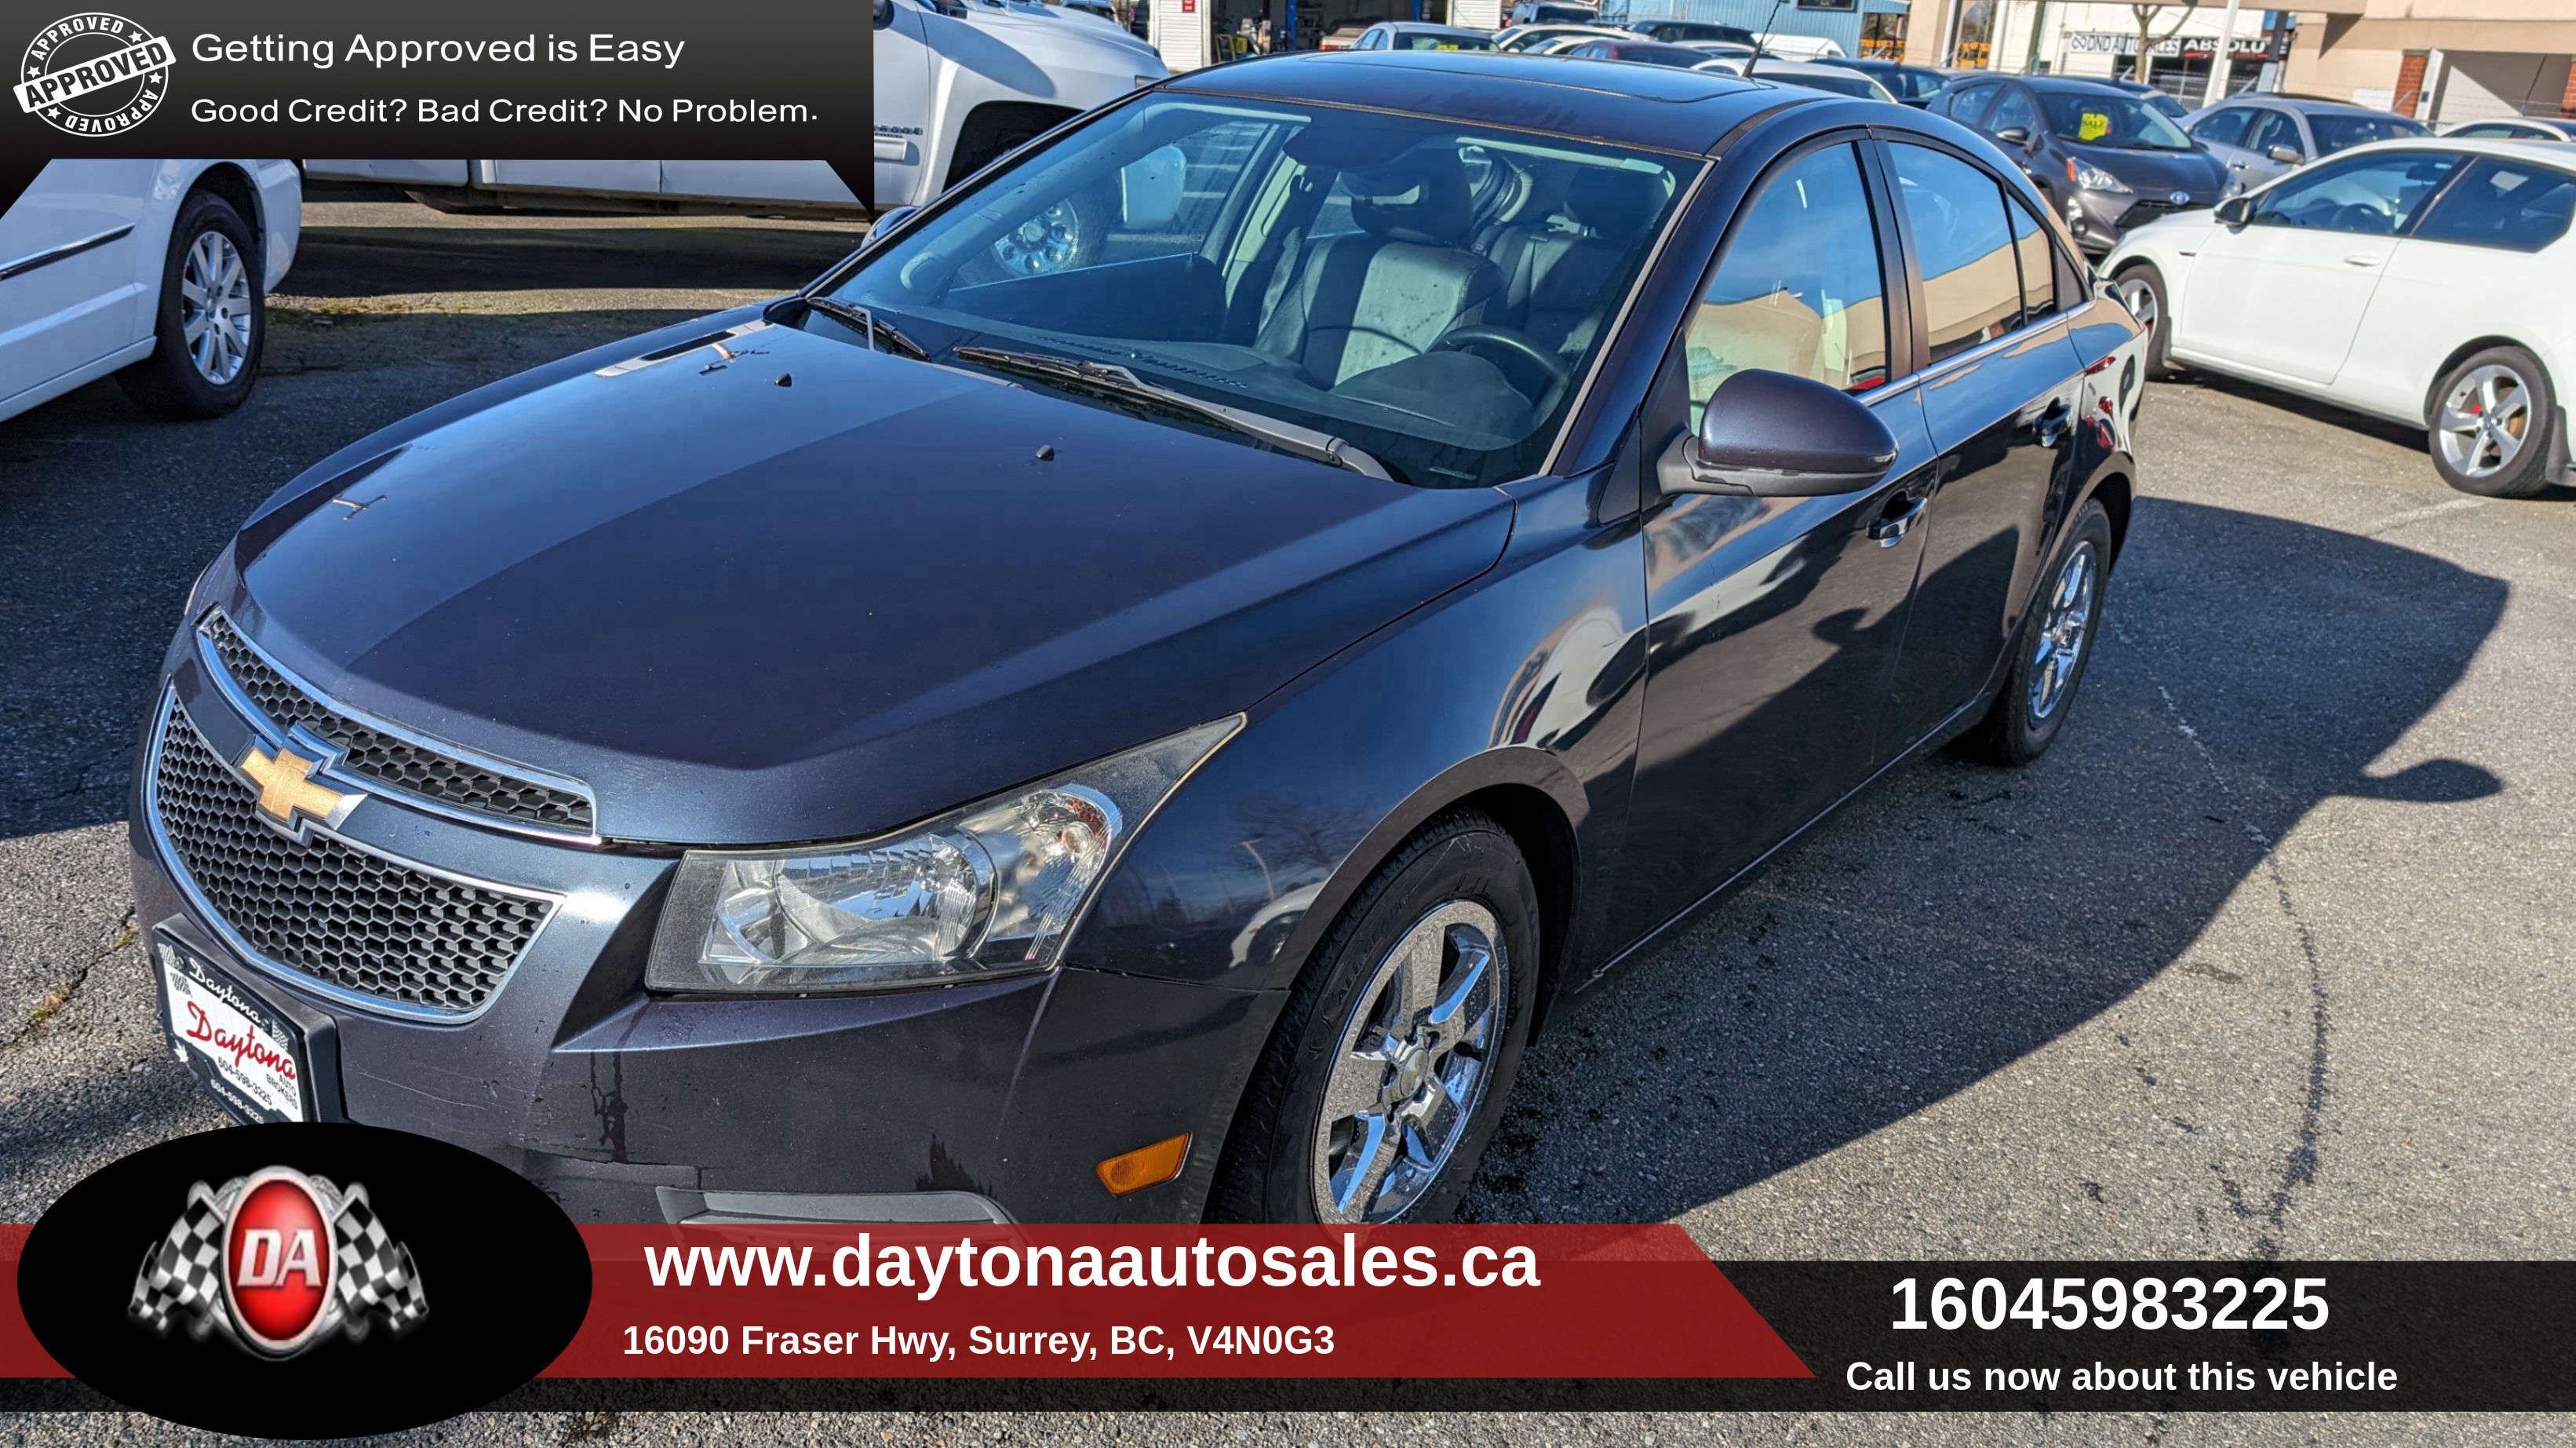 2014 Chevrolet Cruze 4dr Sdn 2LT, heated leather seats, sunroof,